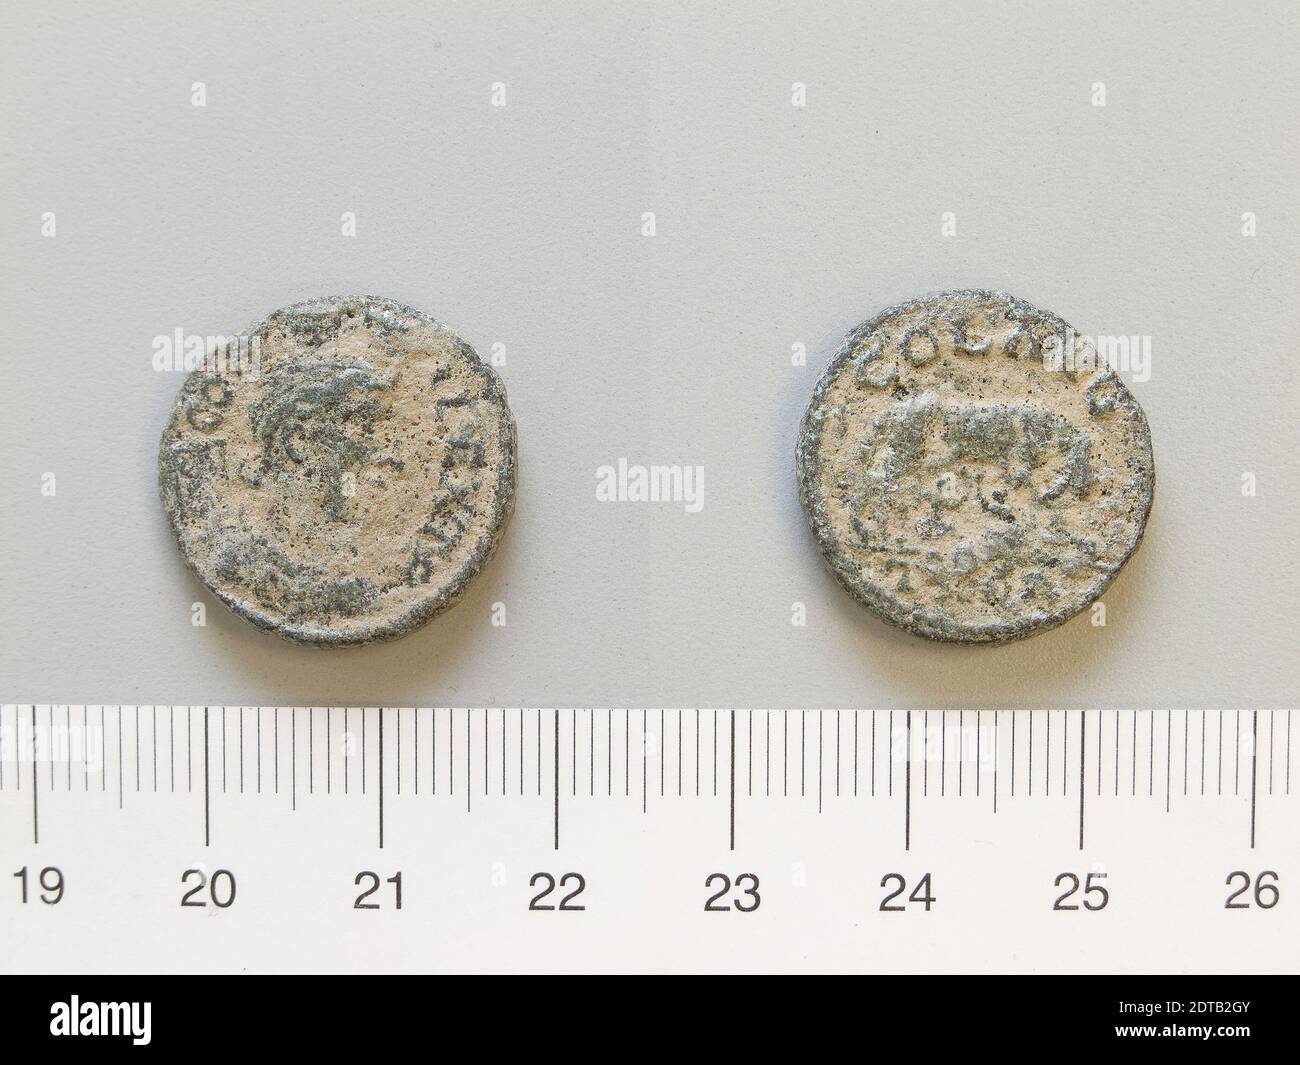 Mint: Alexandria Troas, Coin from Alexandria Troas, 3rd–2nd century B.C., Copper, 7.17 g, 12:00, 20.4 mm, Made in Alexandria Troas, Greek, 3rd–2nd century B.C., Numismatics Stock Photo